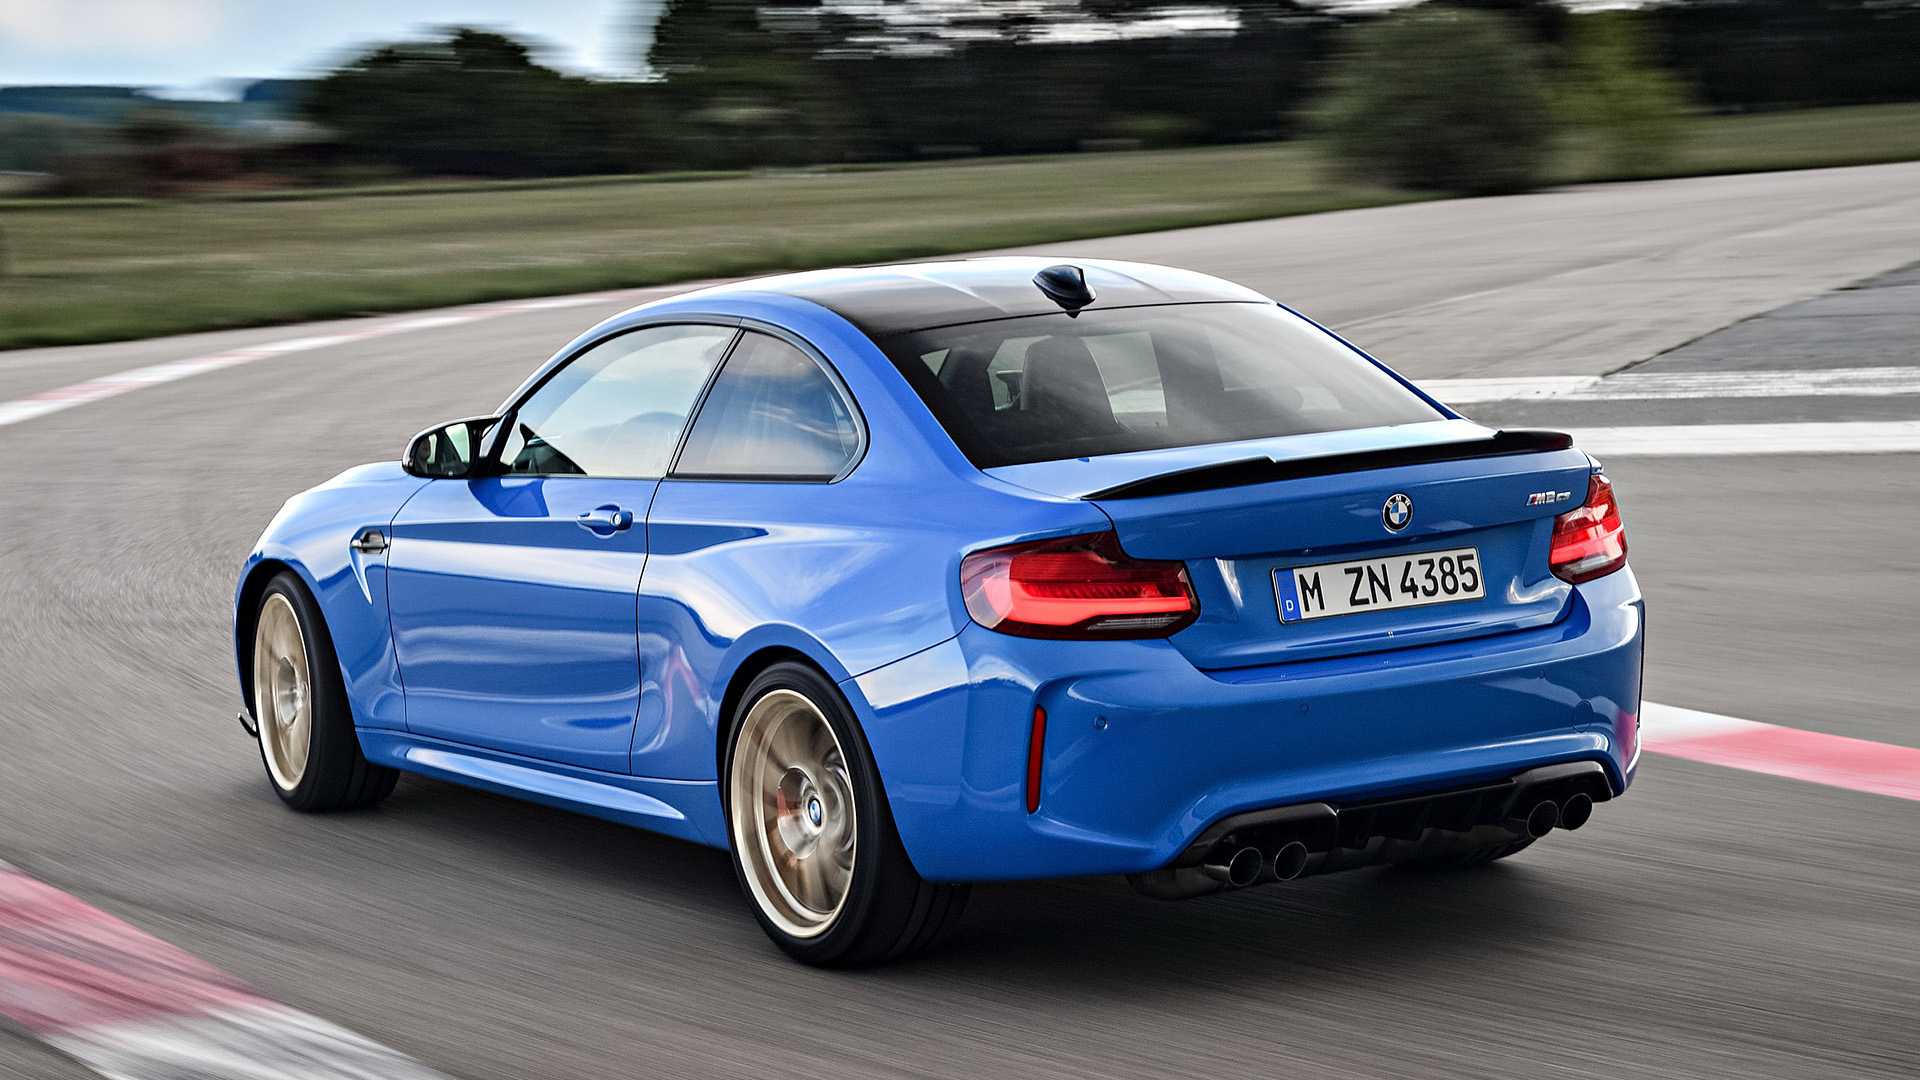 BMW M2 xDrive Coupe Backgrounds